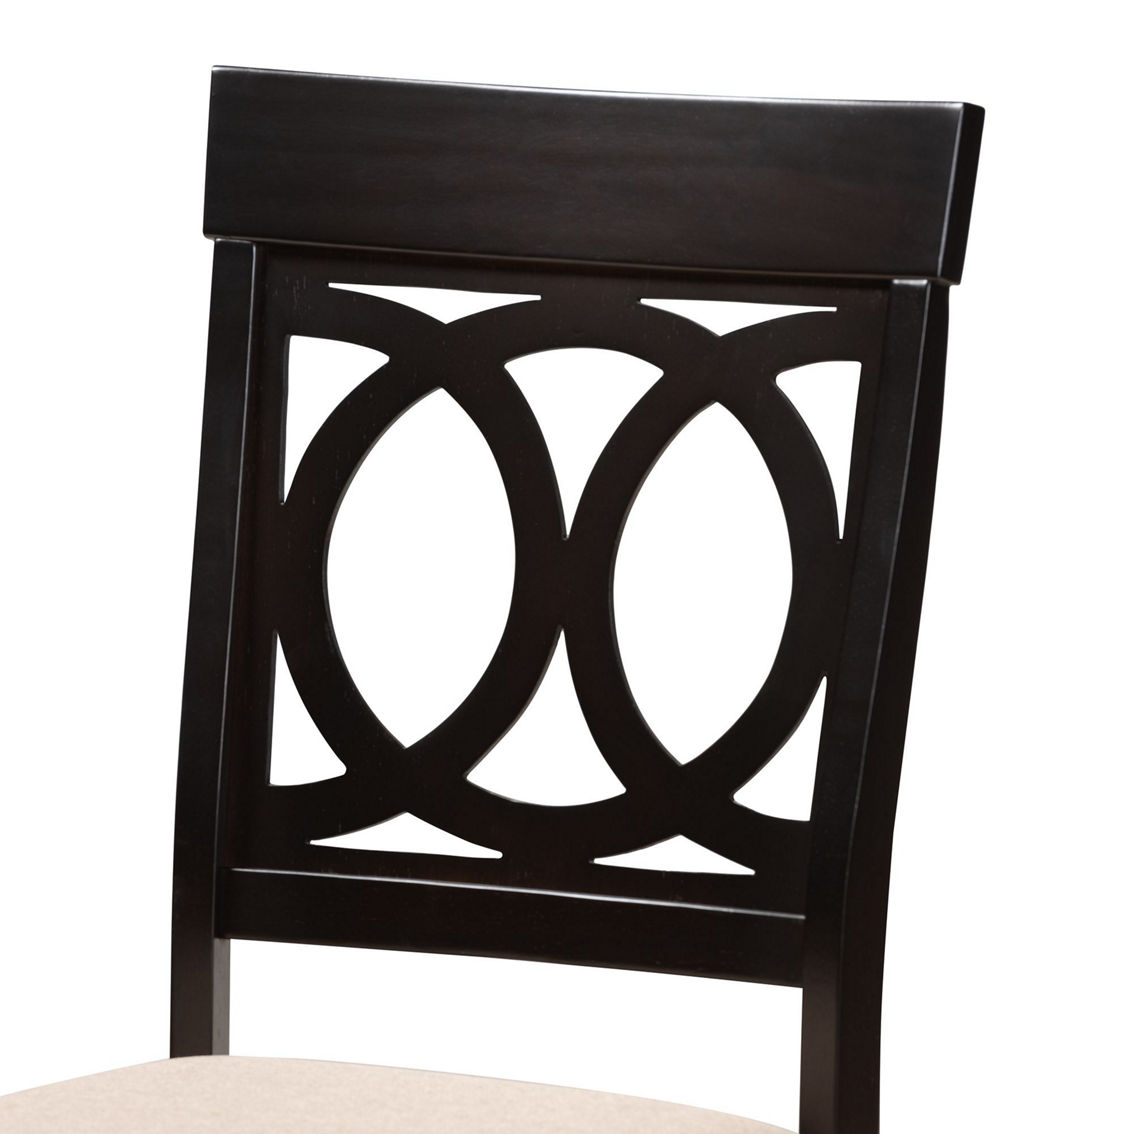 Baxton Studio Lucie Fabric Upholstered Wood Dining Chair 4 Piece Set - Image 3 of 5